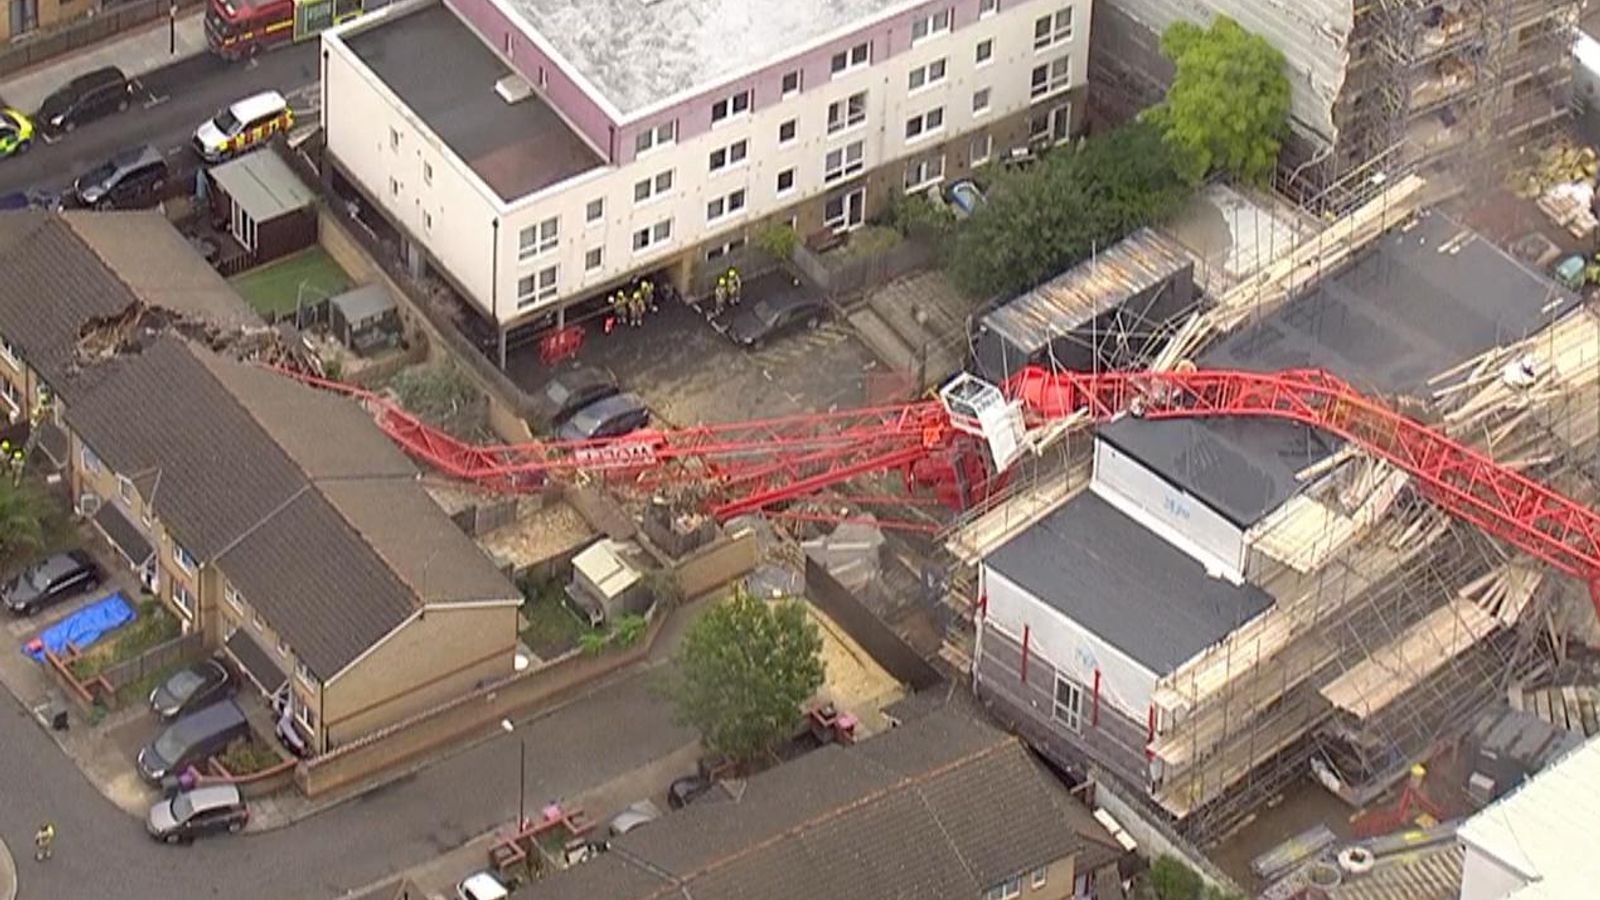 Bow Crane Collapse One Dead After Crane Falls On Houses In East London Uk News Sky News